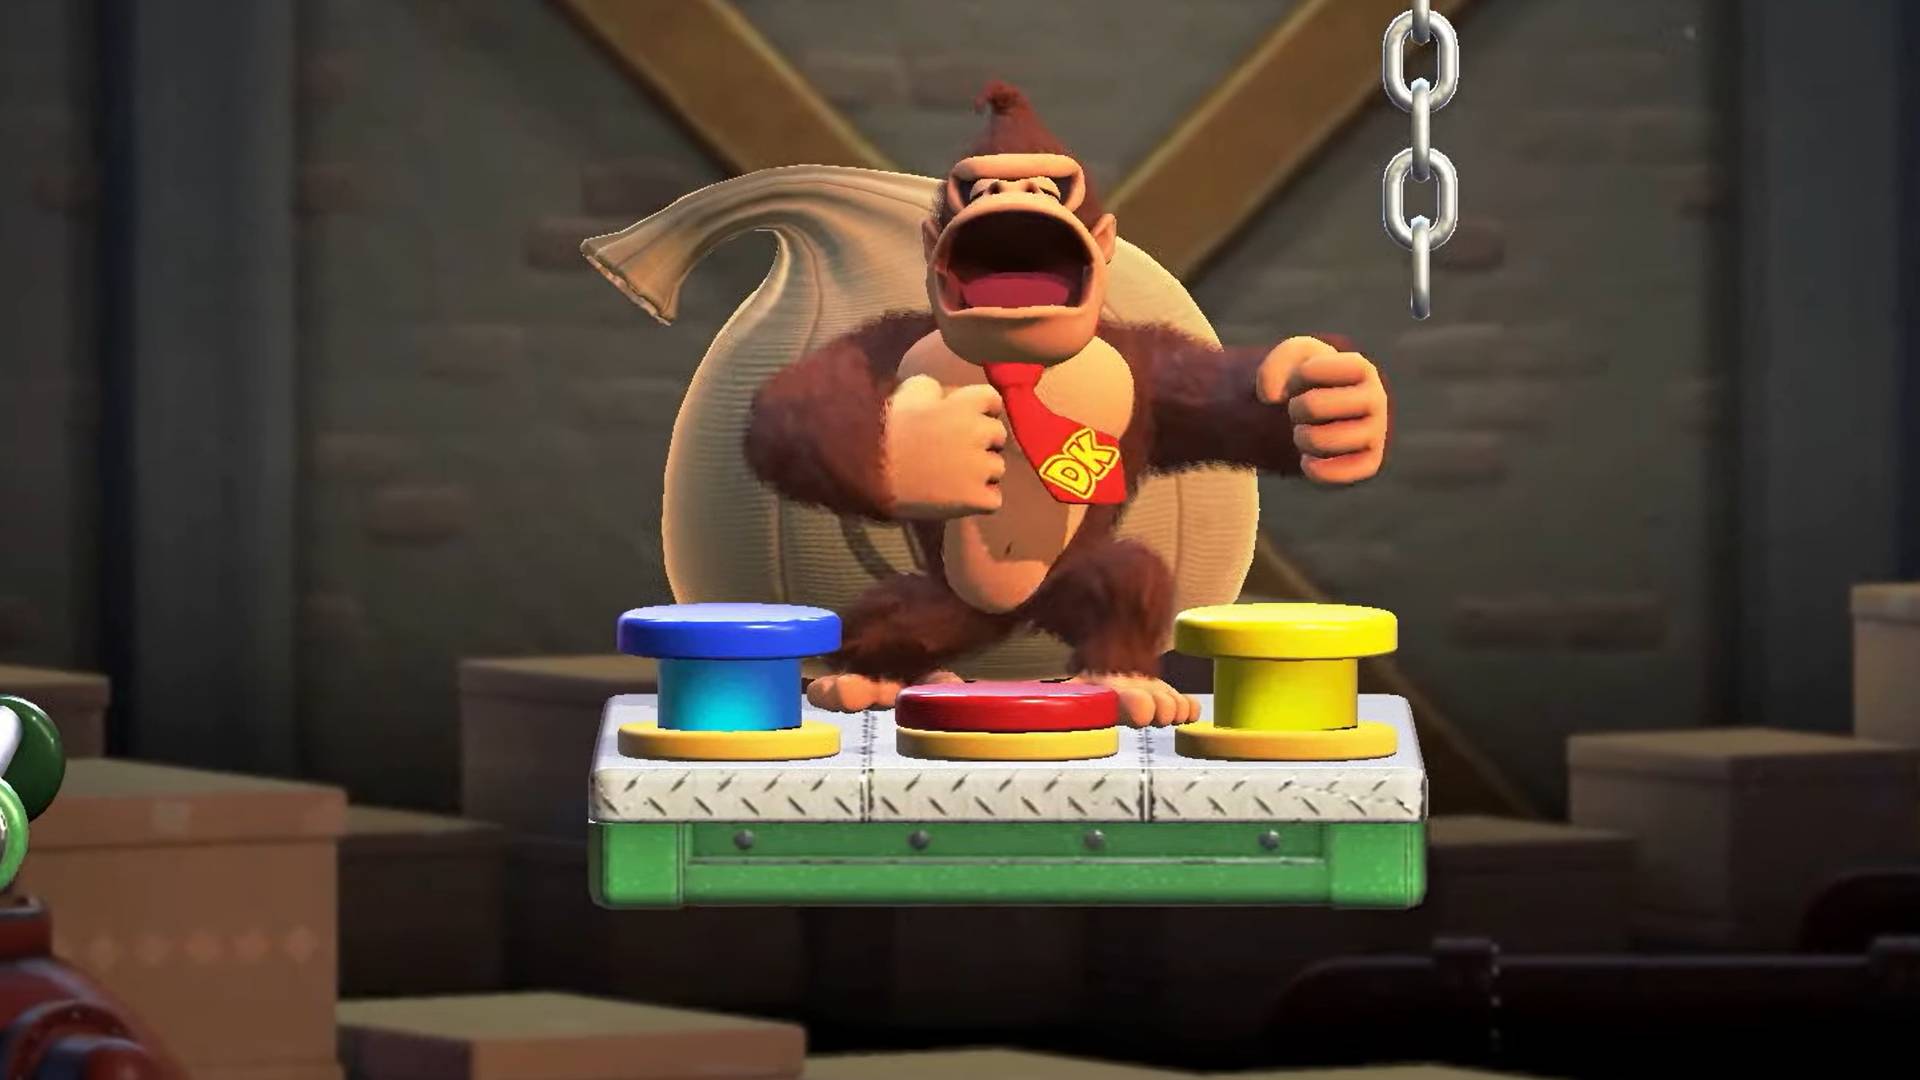 Mario vs Donkey Kong is swinging onto Switch next year 247GN Network